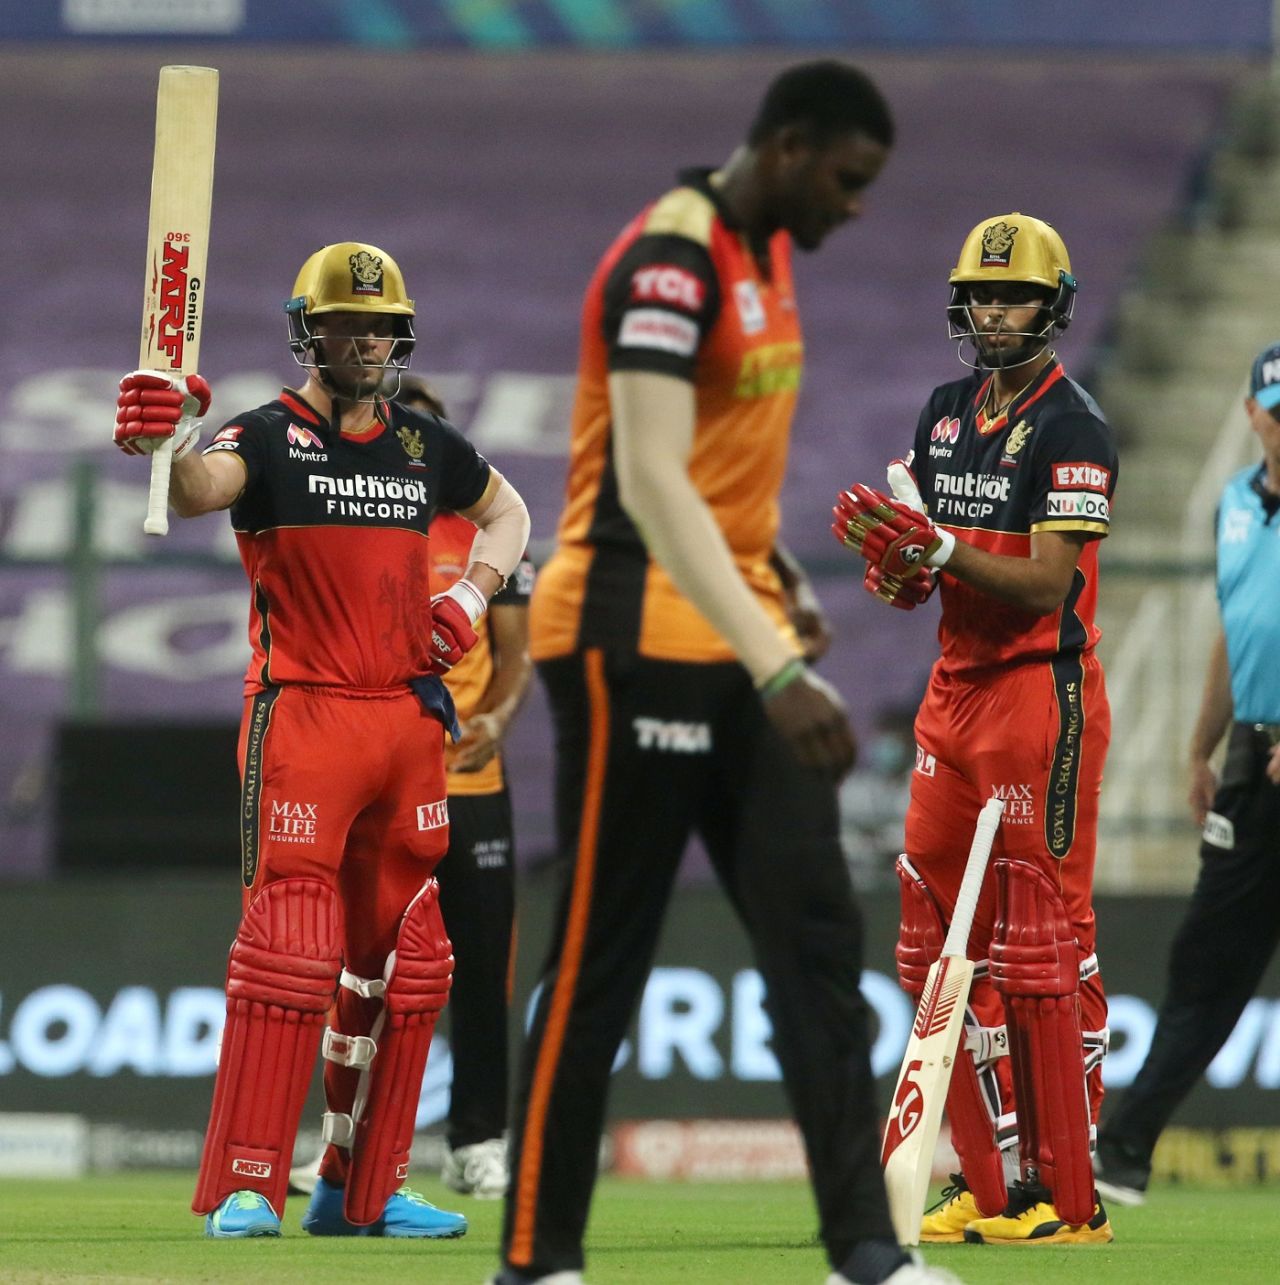 AB de Villiers hit a 43-ball 56 - as long as he was there, a big total was on the cards, Royal Challengers Bangalore vs Sunrisers Hyderabad, IPL 2020, Eliminator, November 6, 2020